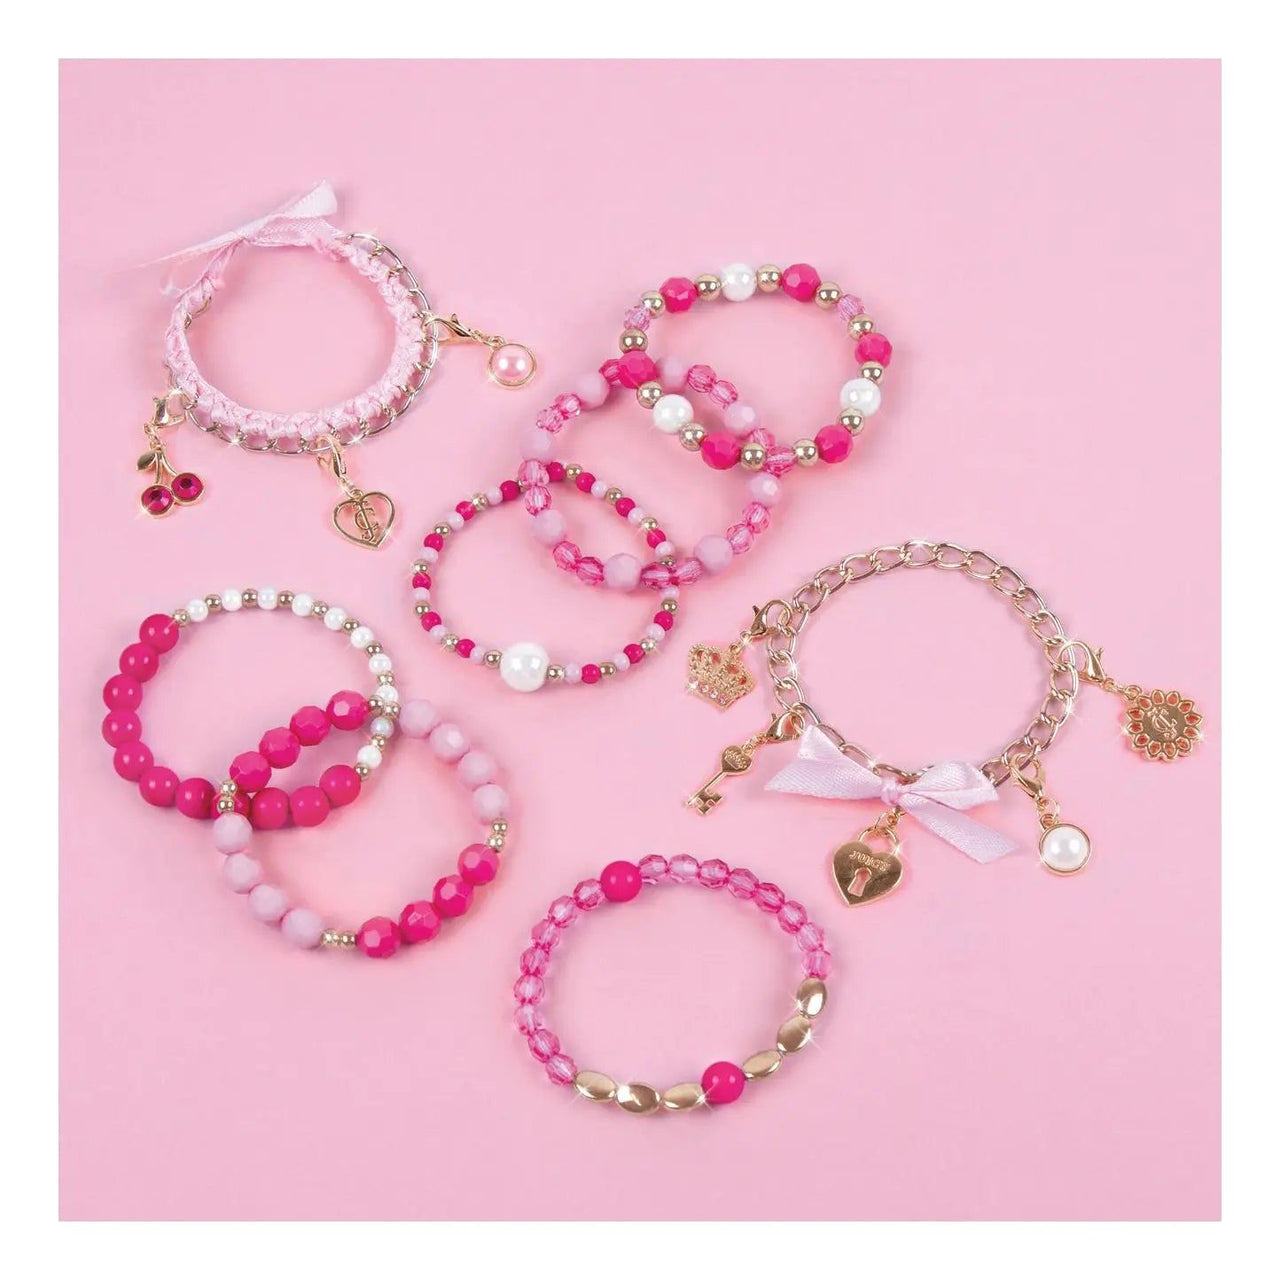 Juicy Couture Perfectly Pink Bracelets Make It Real